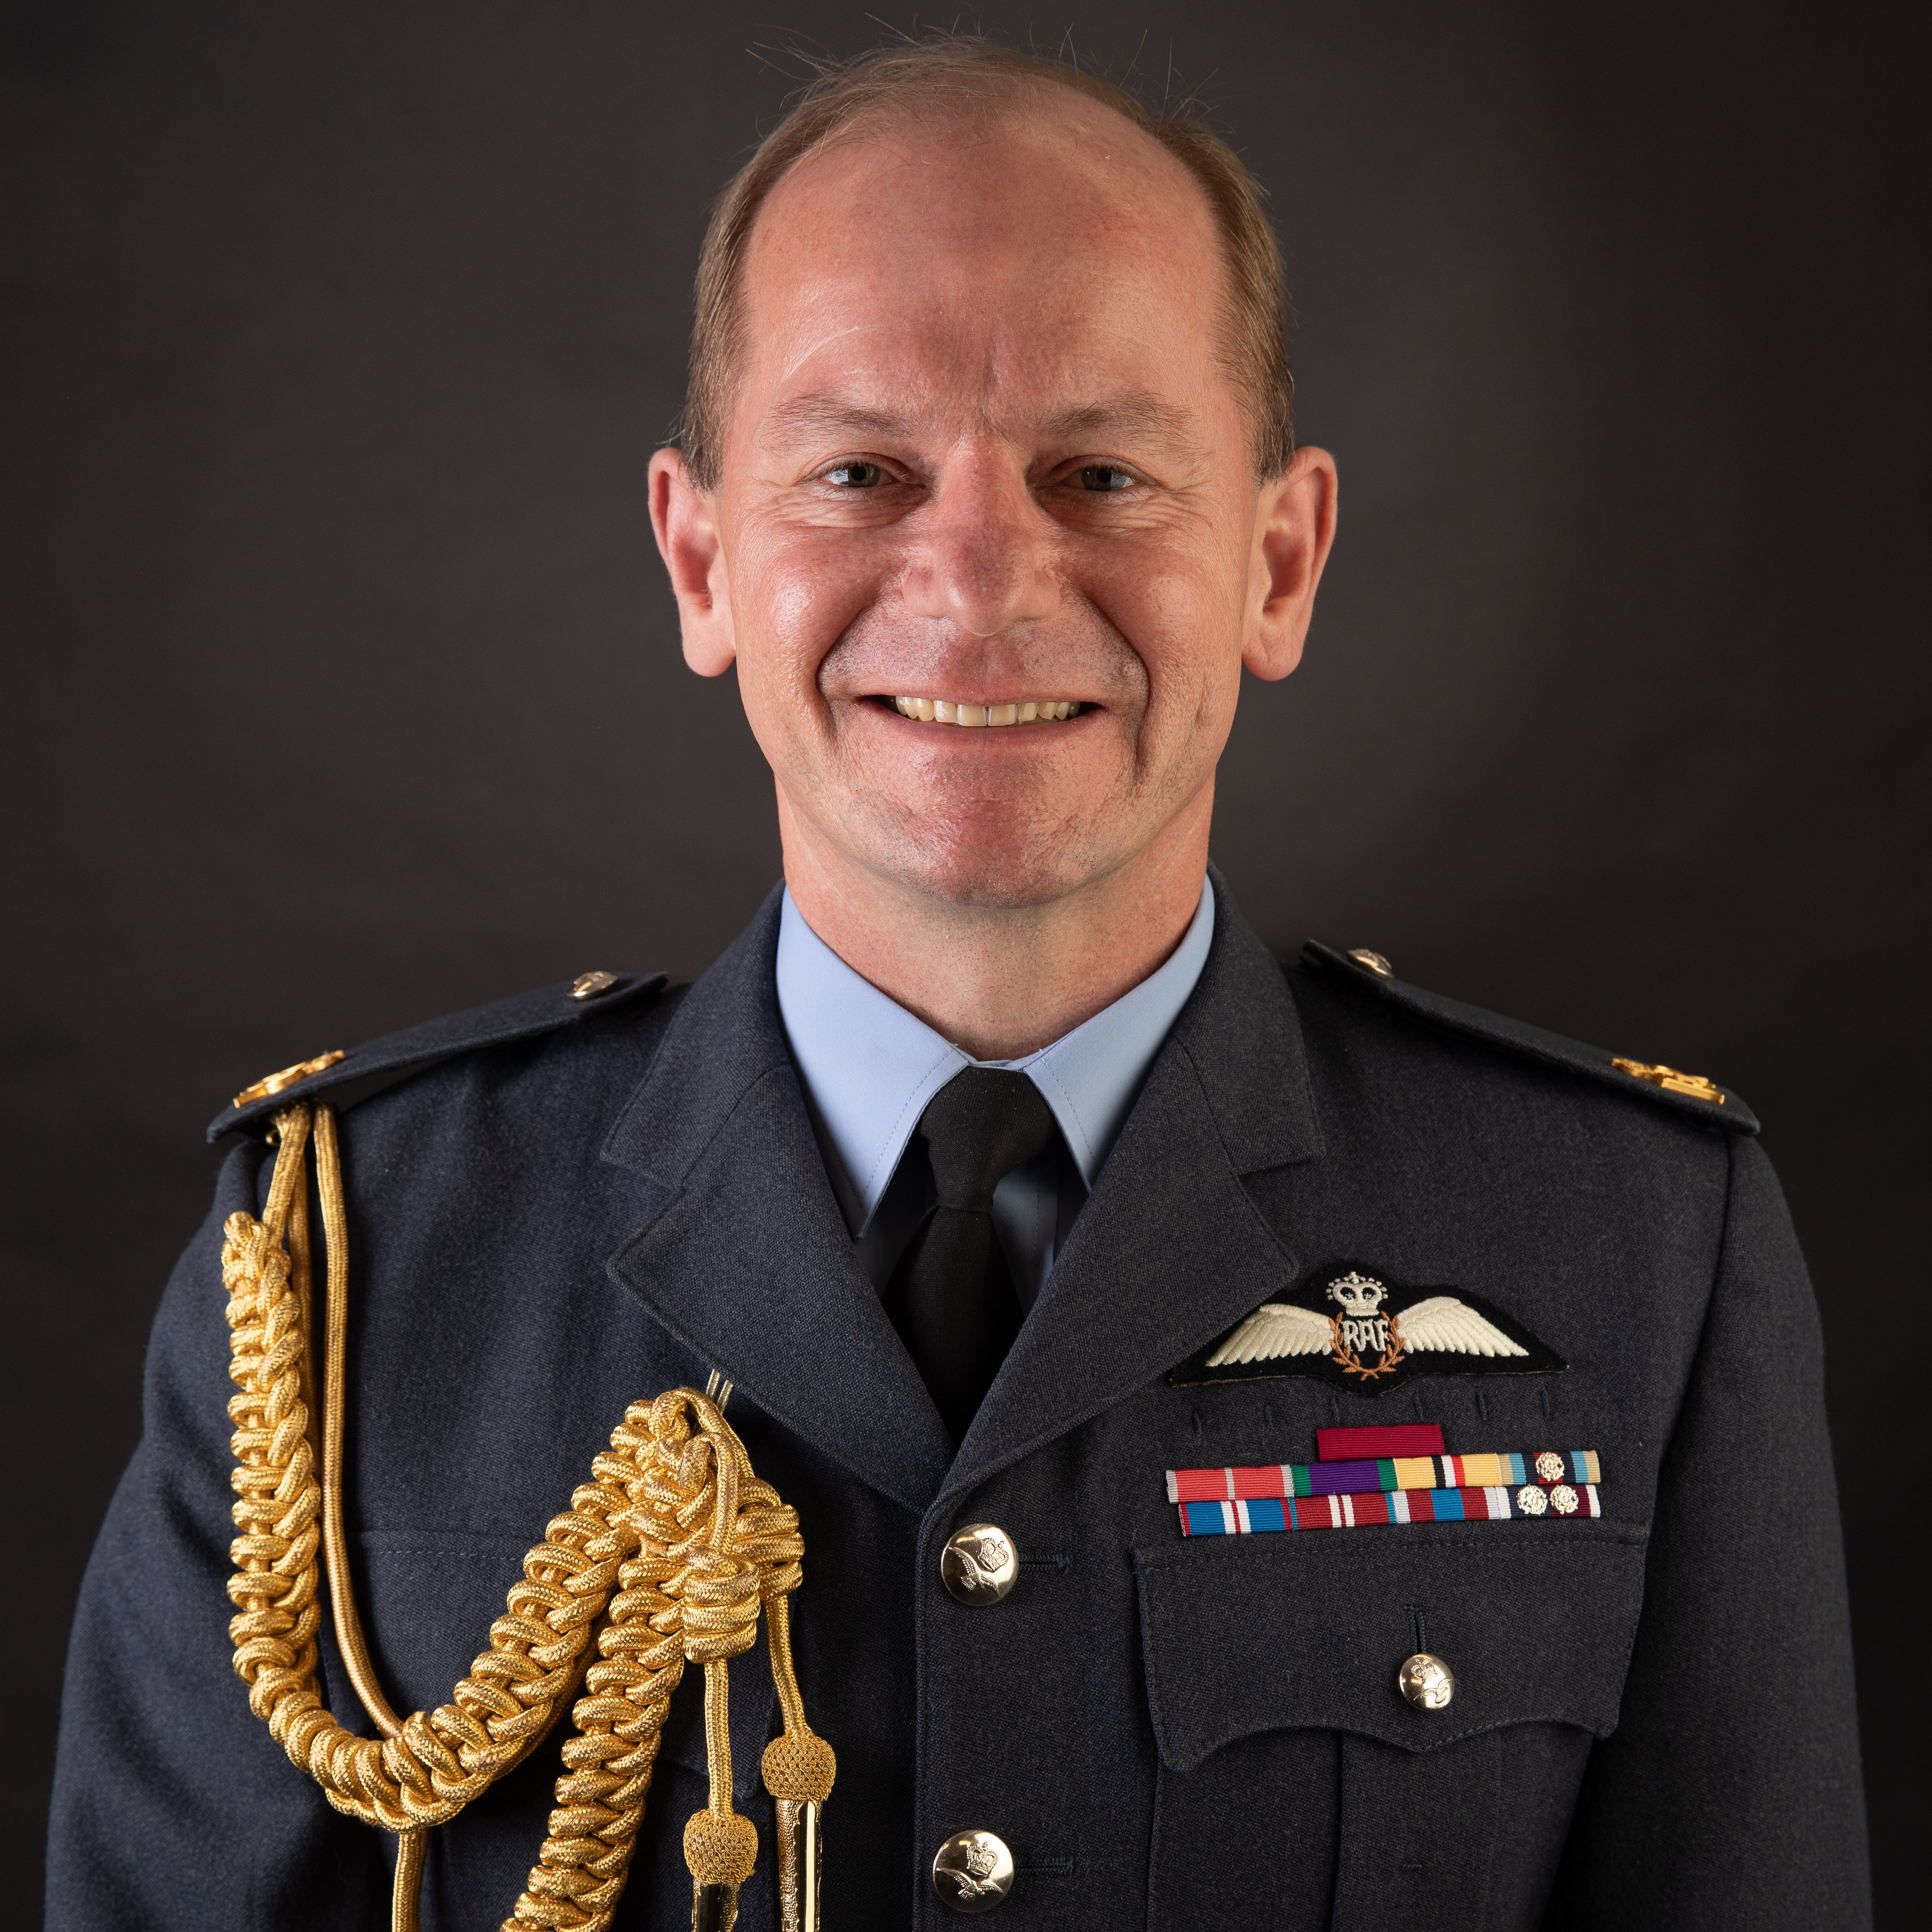 Image shows the Chief of the Air Staff portrait.